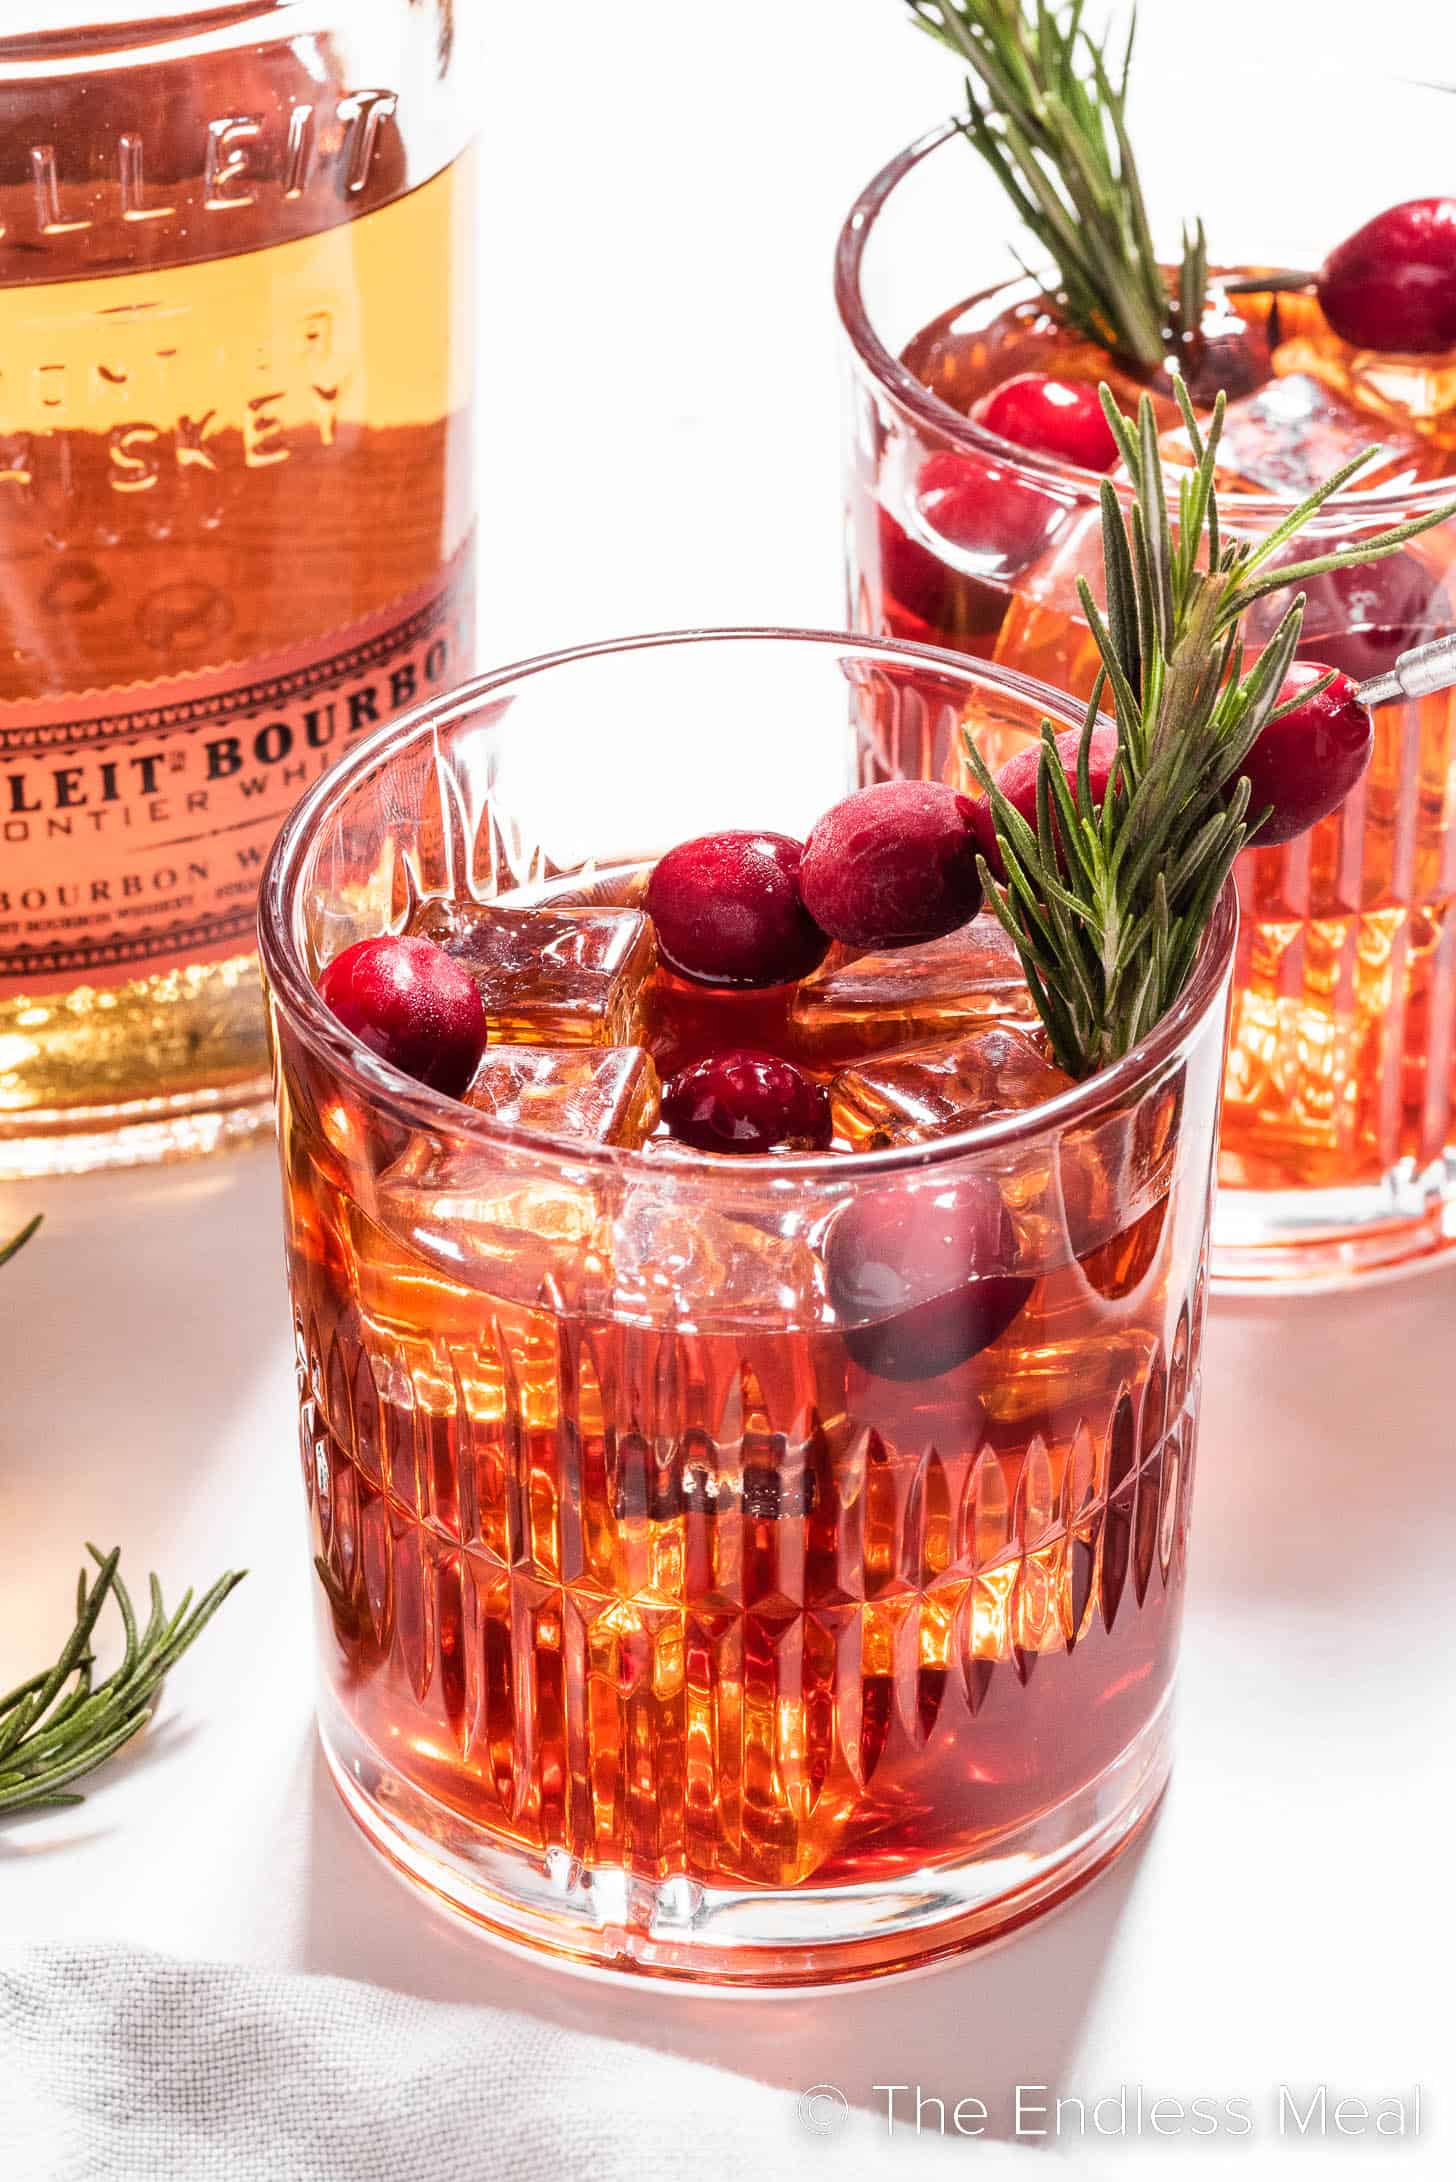 A Cranberry Bourbon Sour garnished with rosemary